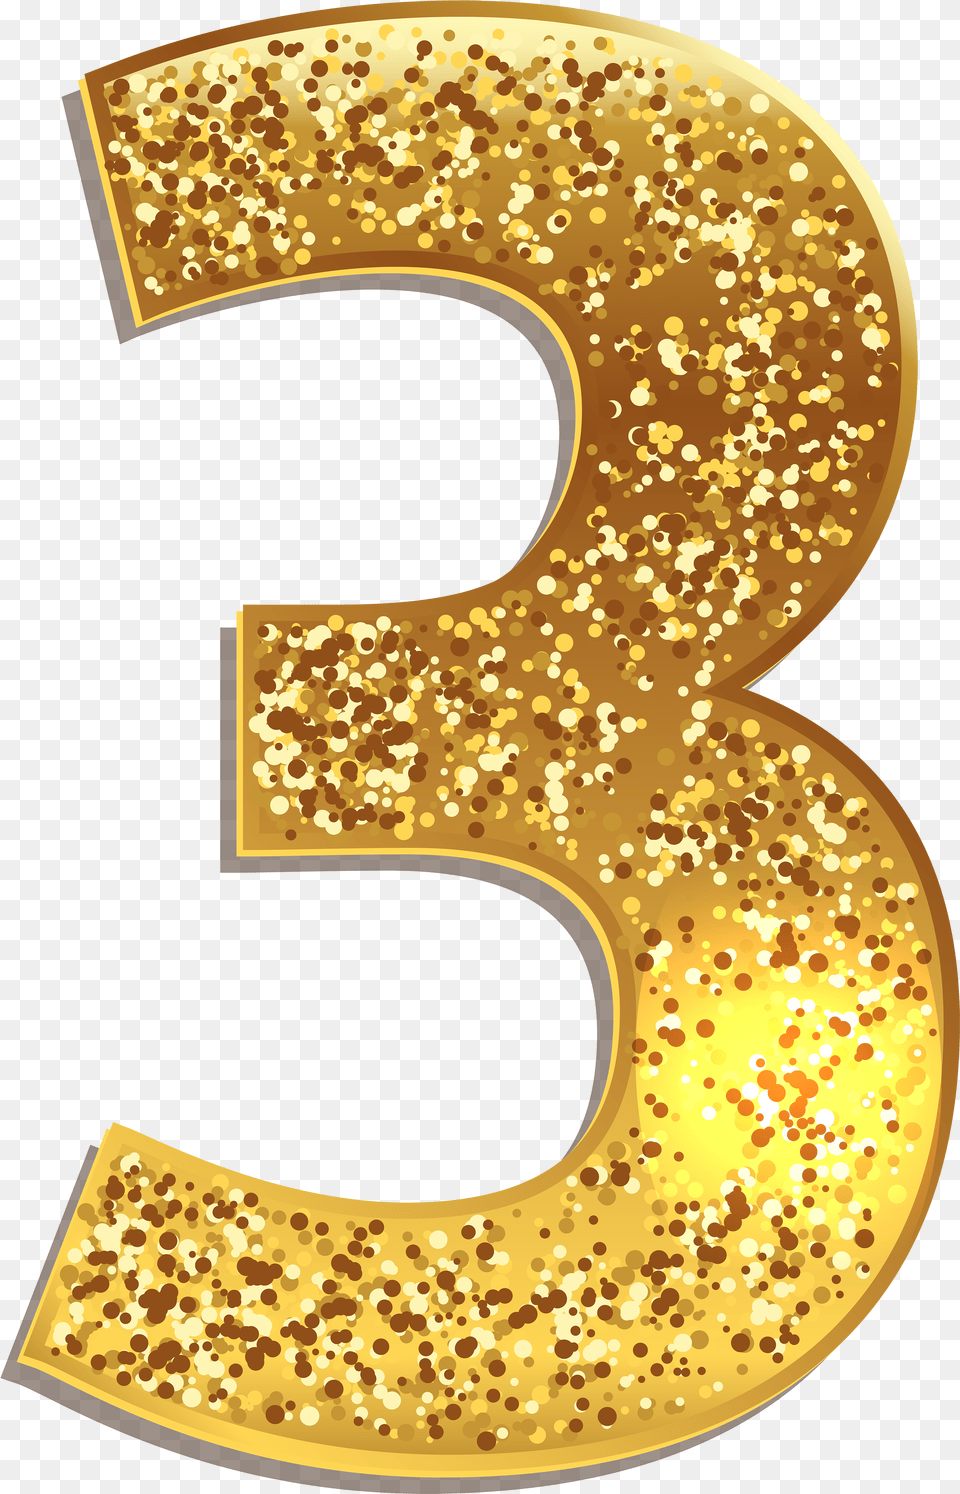 Httpsgalleryyopricevillecomfree Clipartpictures Gold Glitter Numbers, Number, Symbol, Text, Hot Tub Png Image